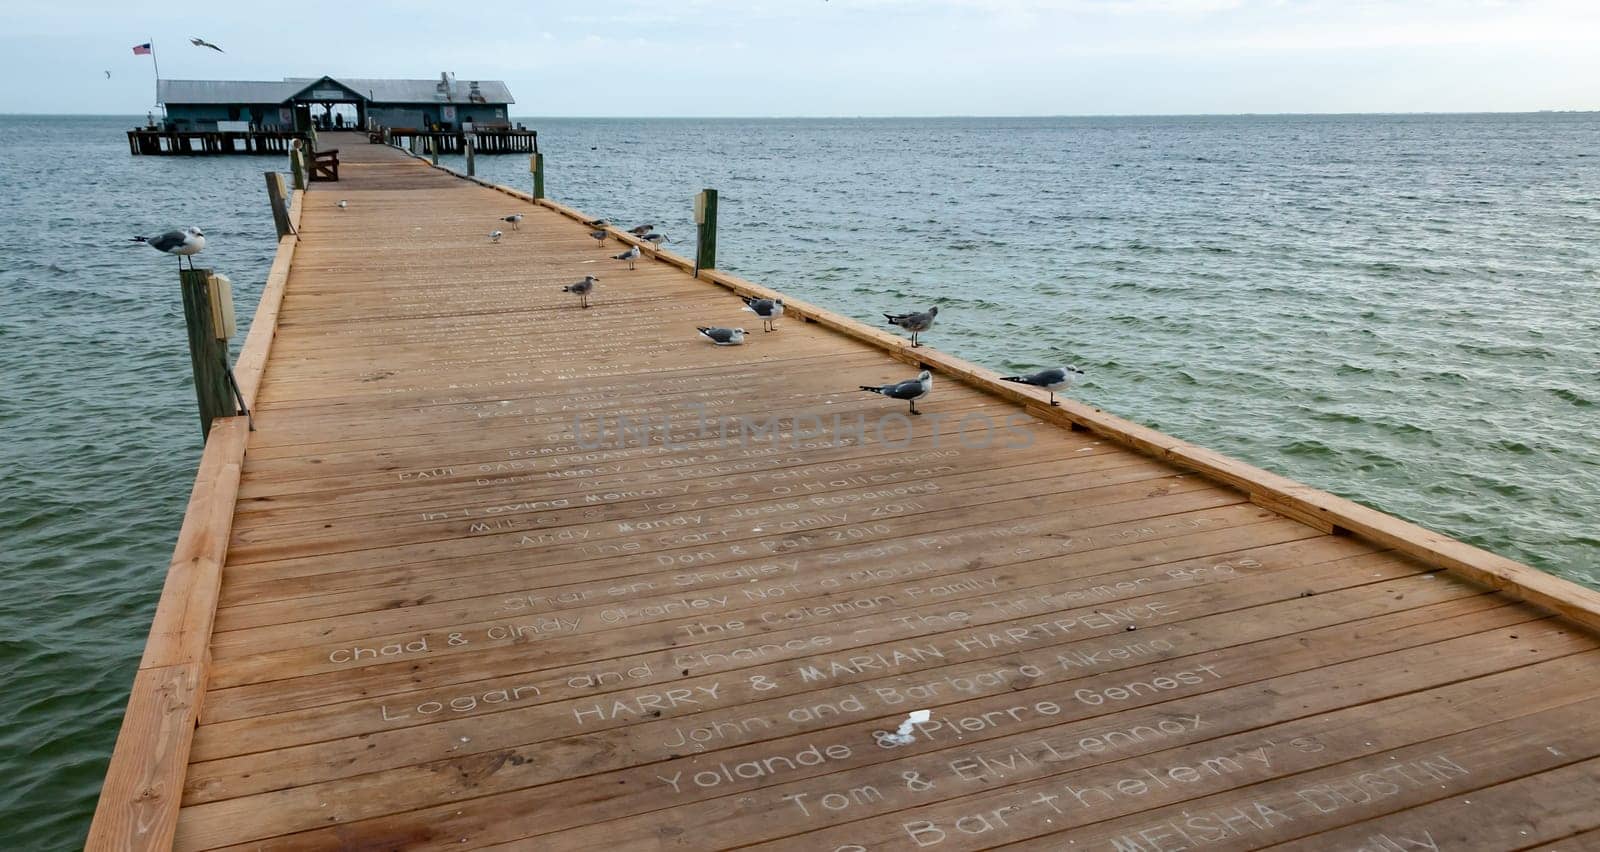 FLORIDA, USA - NOVEMBER 28, 2011: wooden pier with a restaurant on the shore in the Gulf of Mexico, Florida